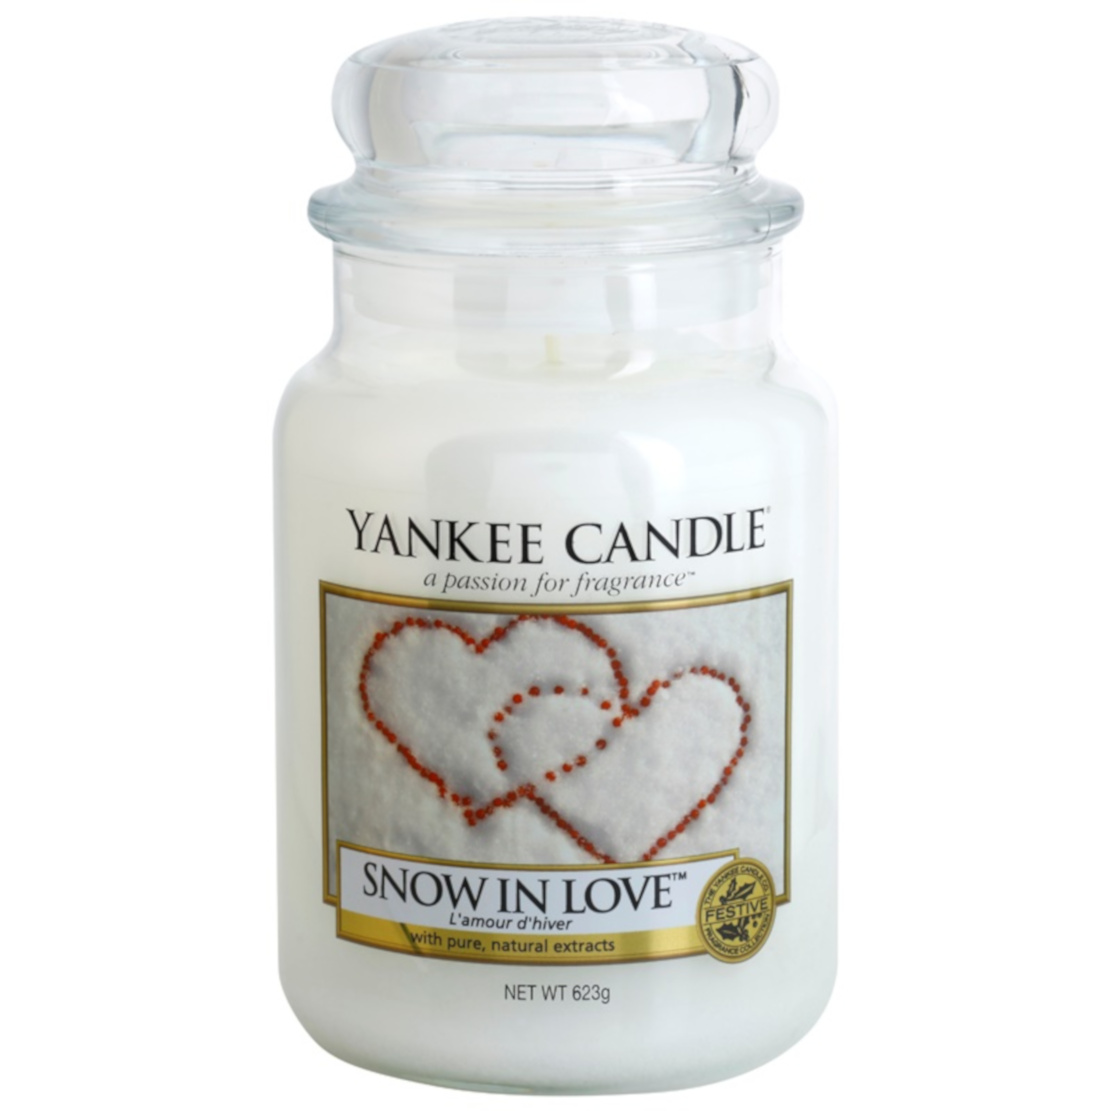 Yankee Candle Snow in Love Large Jar Candle